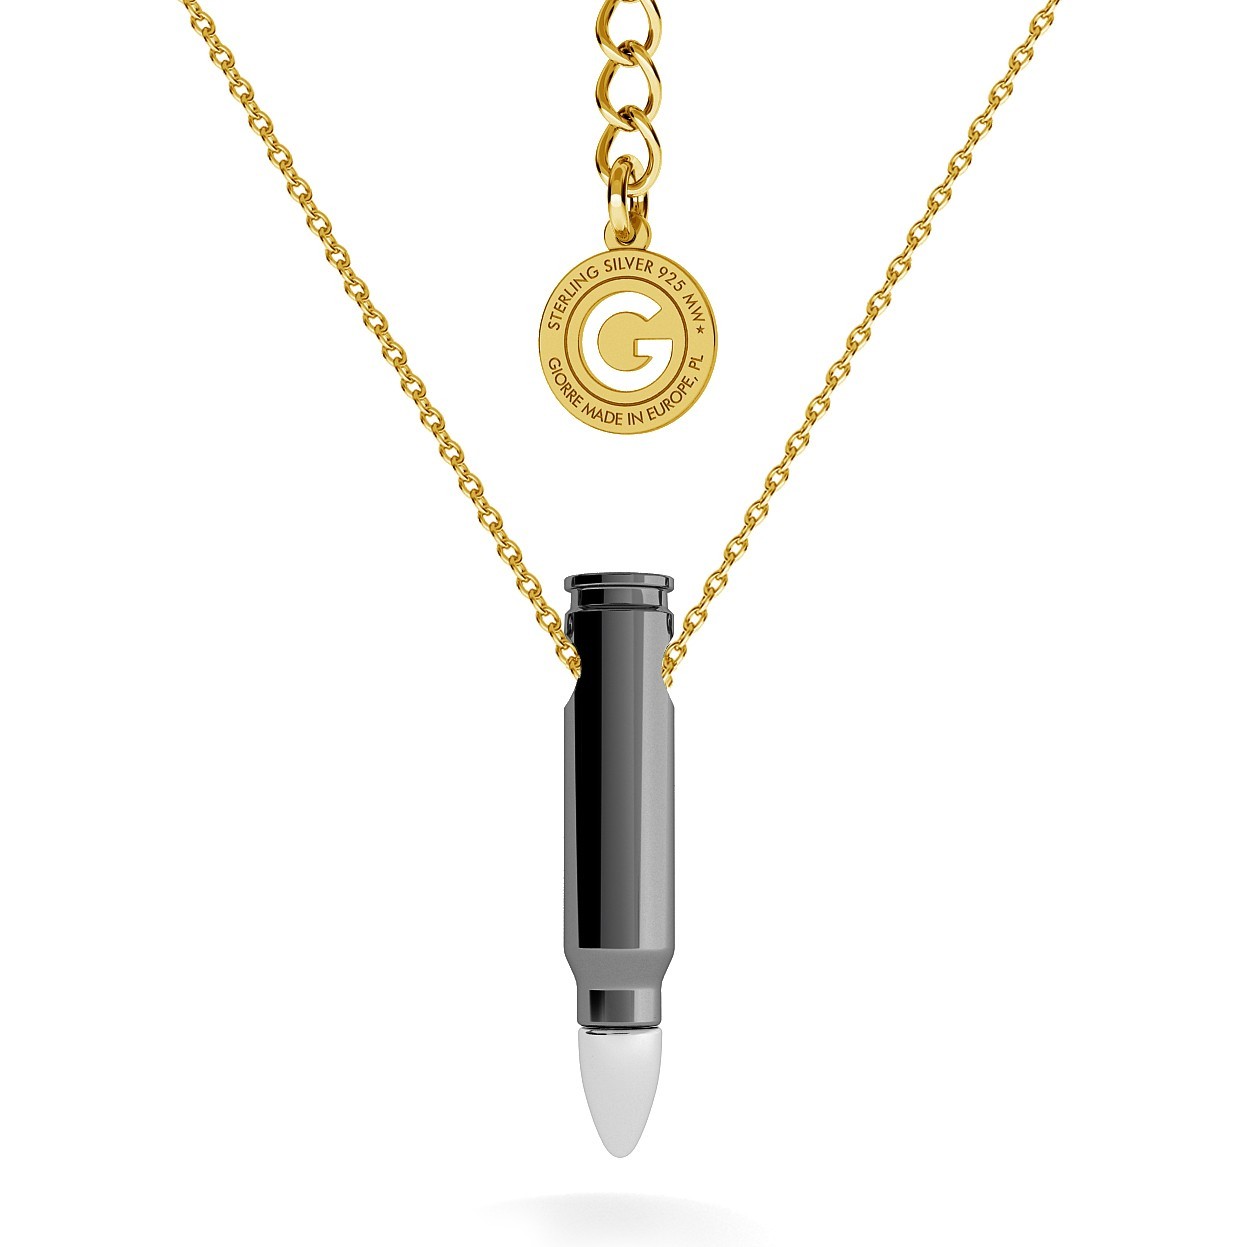 NECKLACE WITH BULLET - MODEL 3